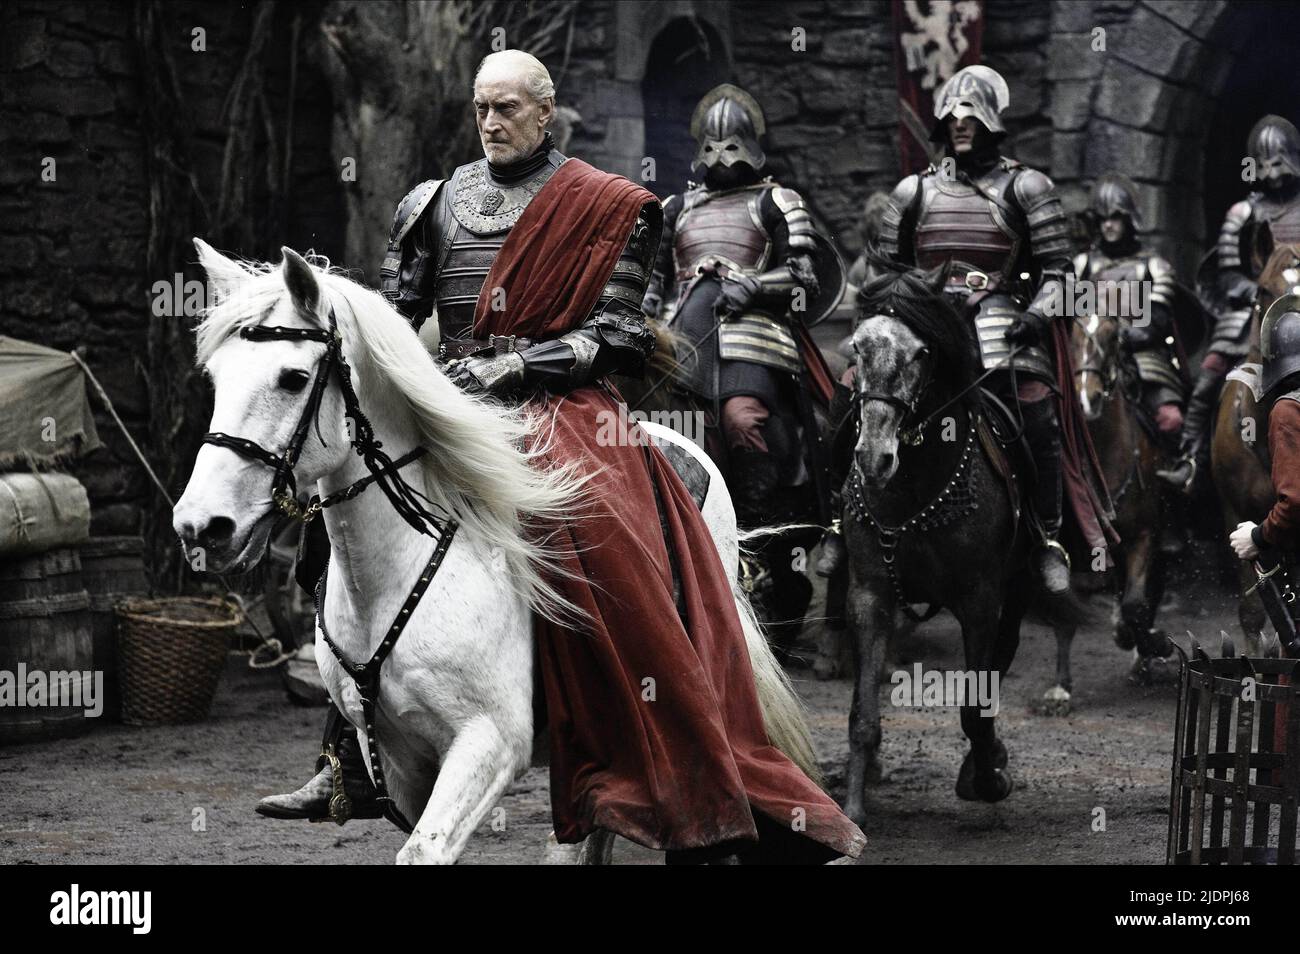 CHARLES DANCE, GAME OF THRONES, 2011, Stock Photo